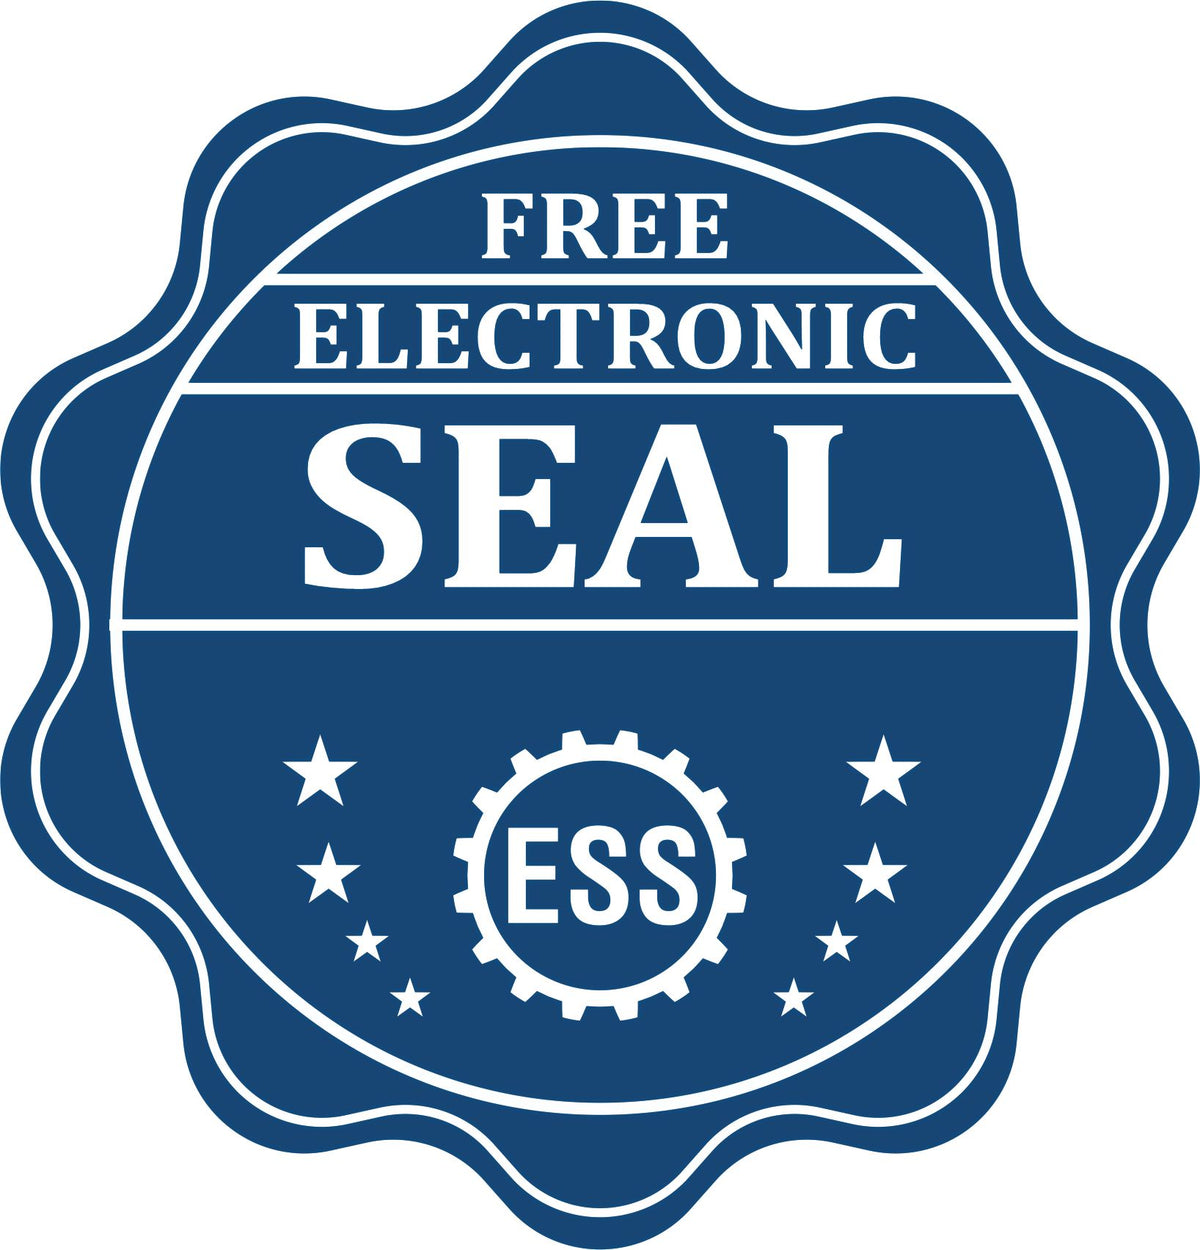 A badge showing a free electronic seal for the Super Slim California Notary Public Stamp with stars and the ESS gear on the emblem.